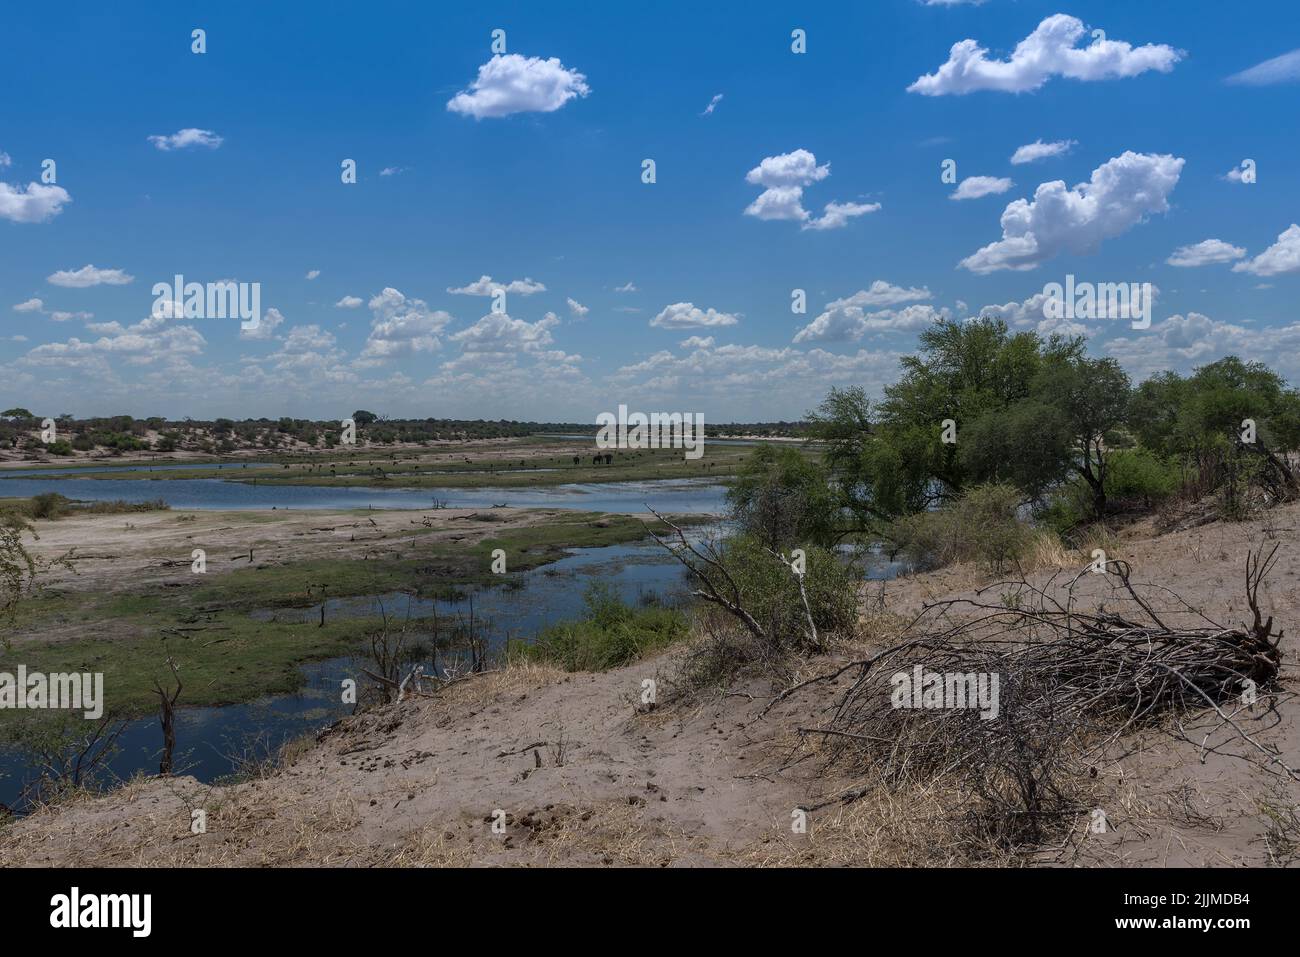 the Boteti river at low tide in summer, Botswana Stock Photo